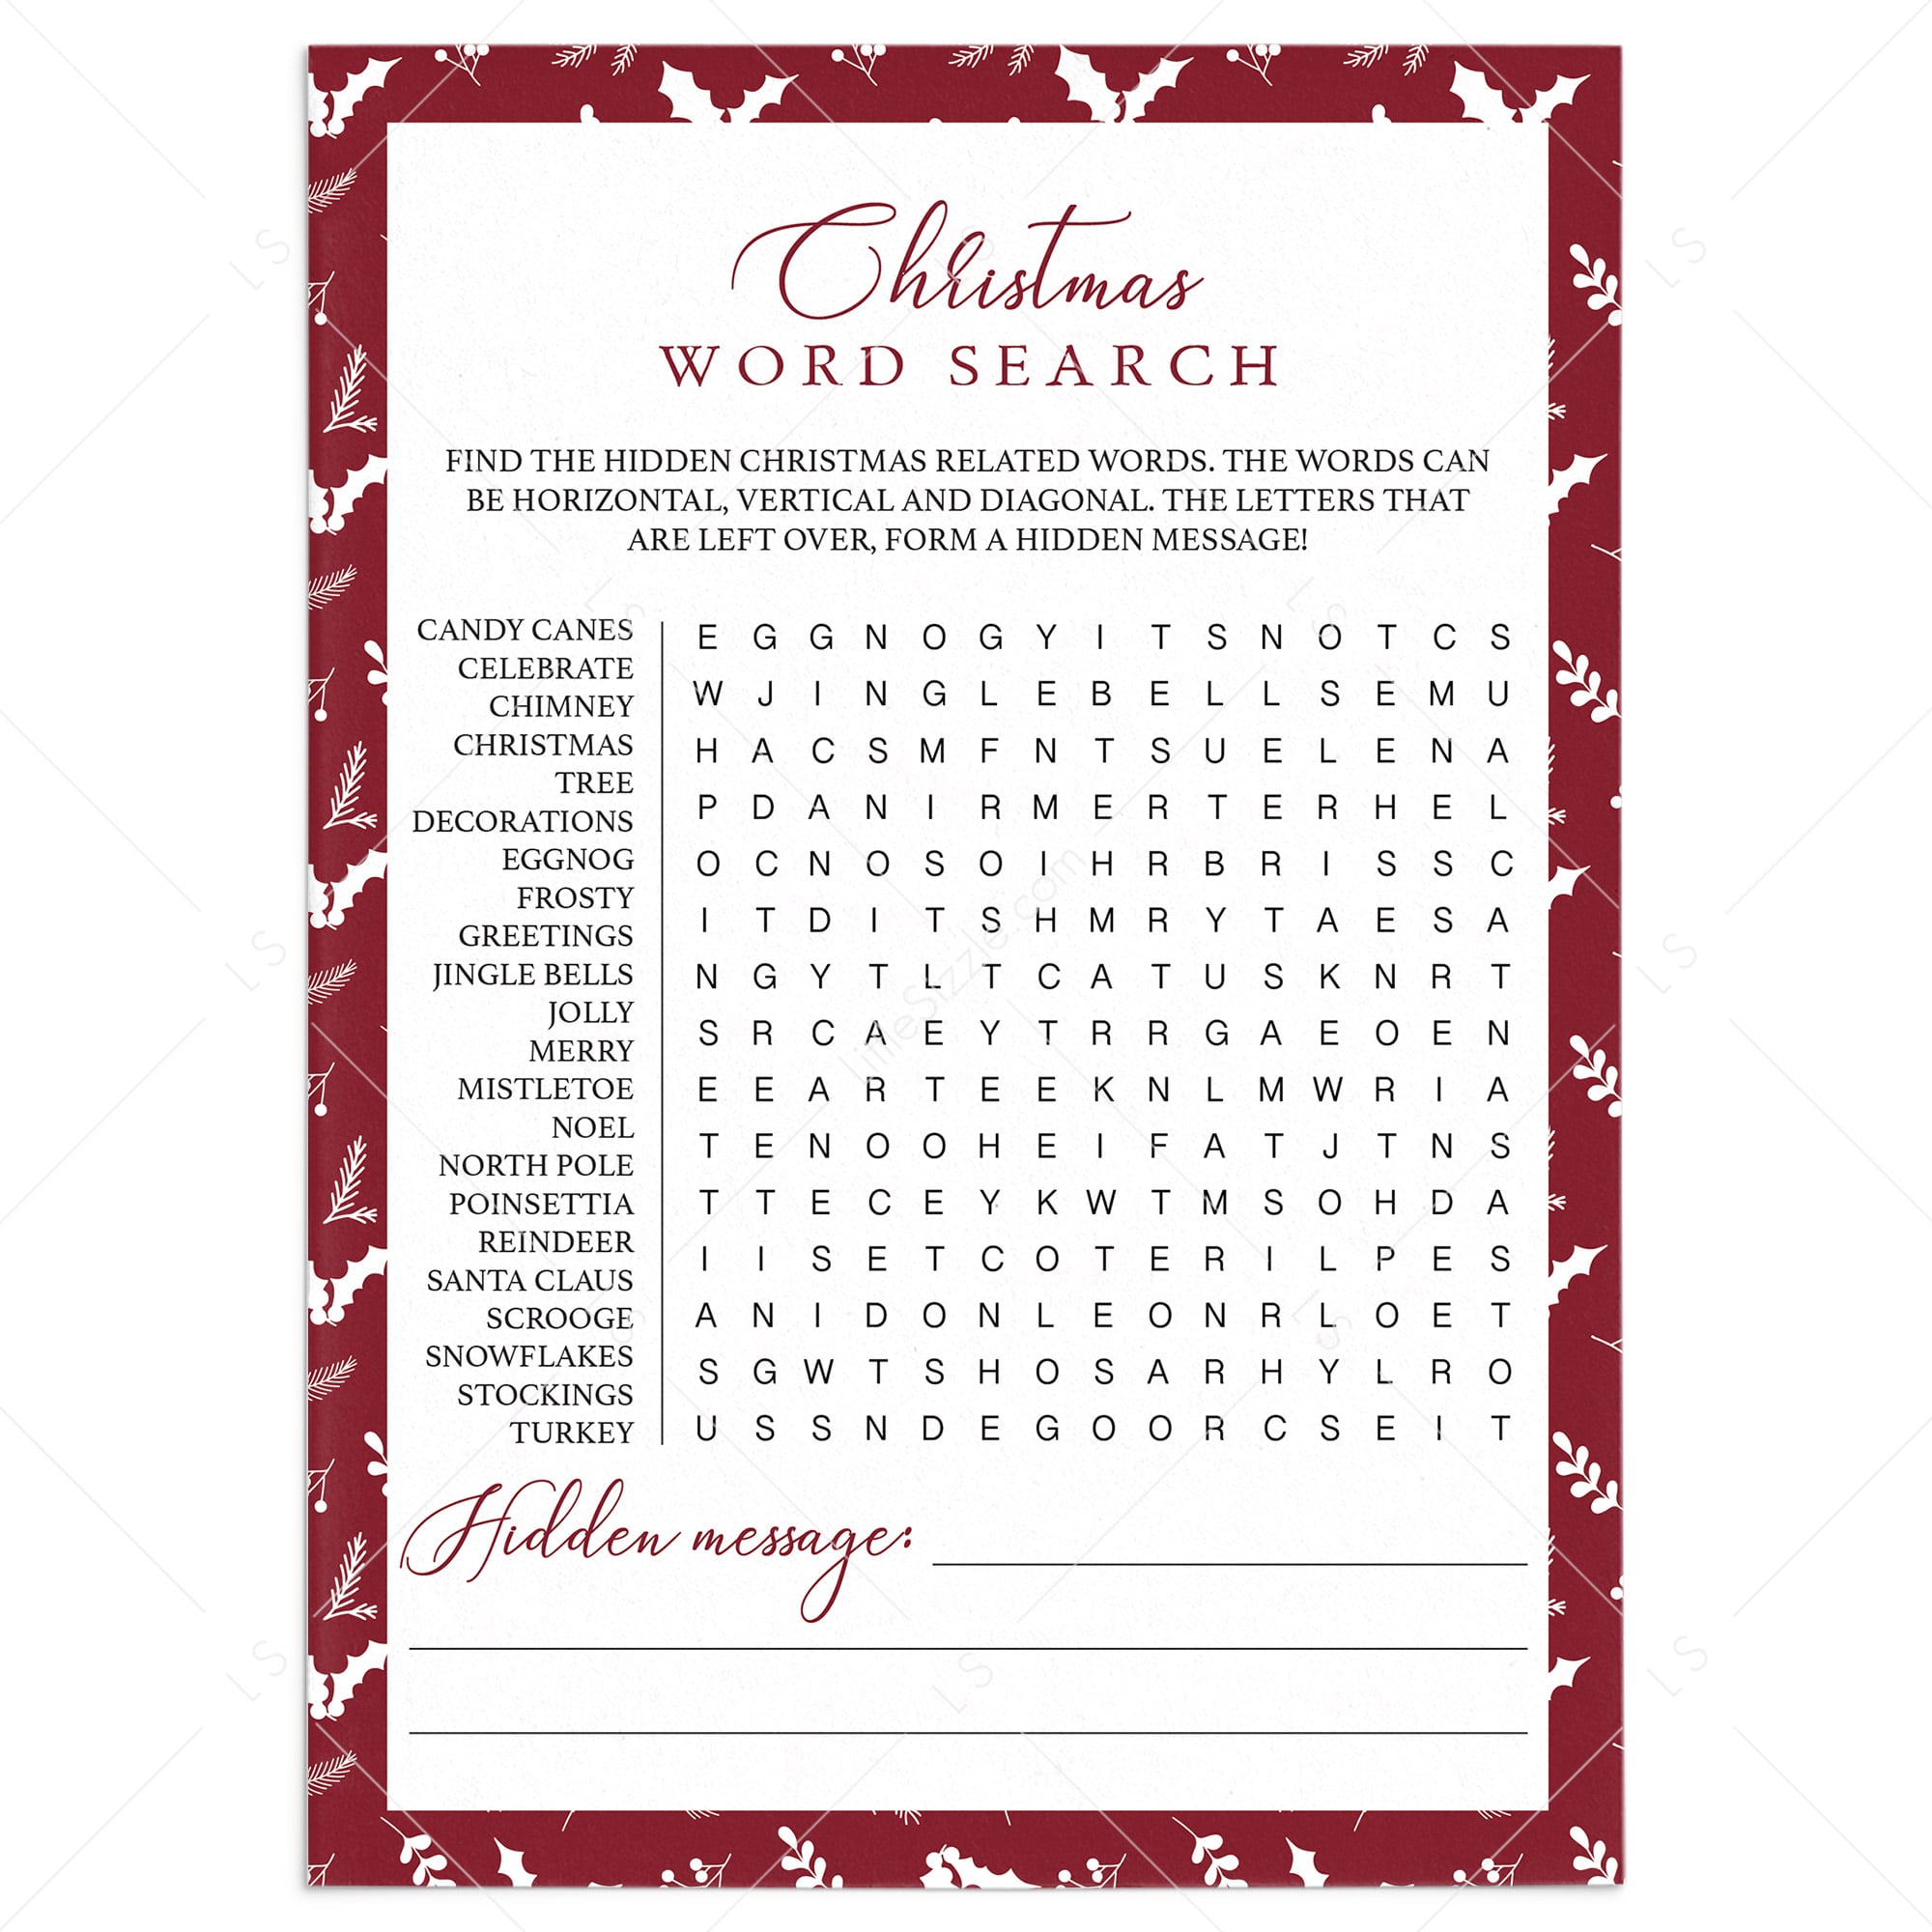 Christmas Word Search Game Download by LittleSizzle